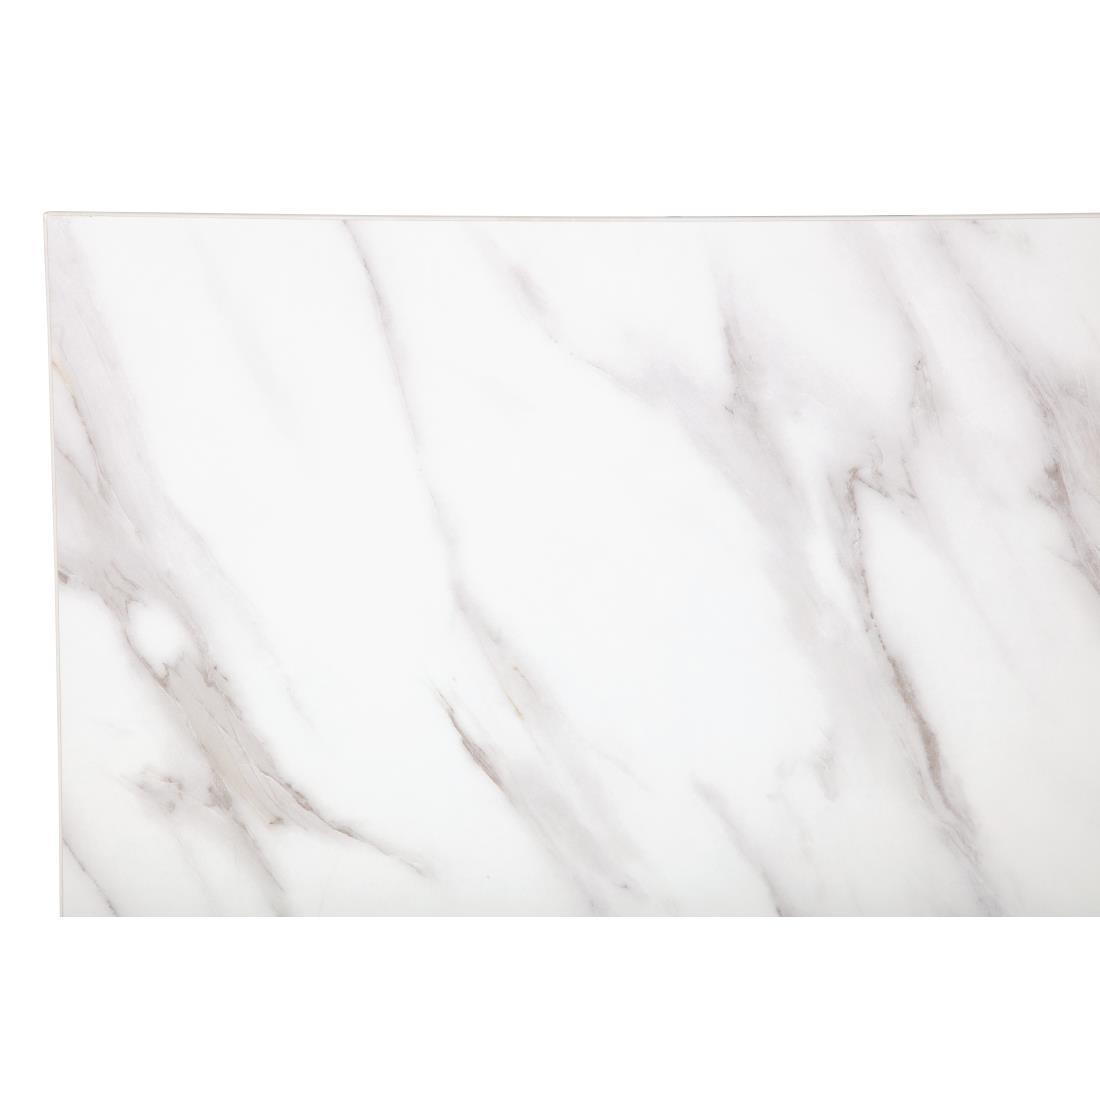 Bolero Pre-Drilled Rectangular Table Top Marble Effect 700mm - DT447  - 3